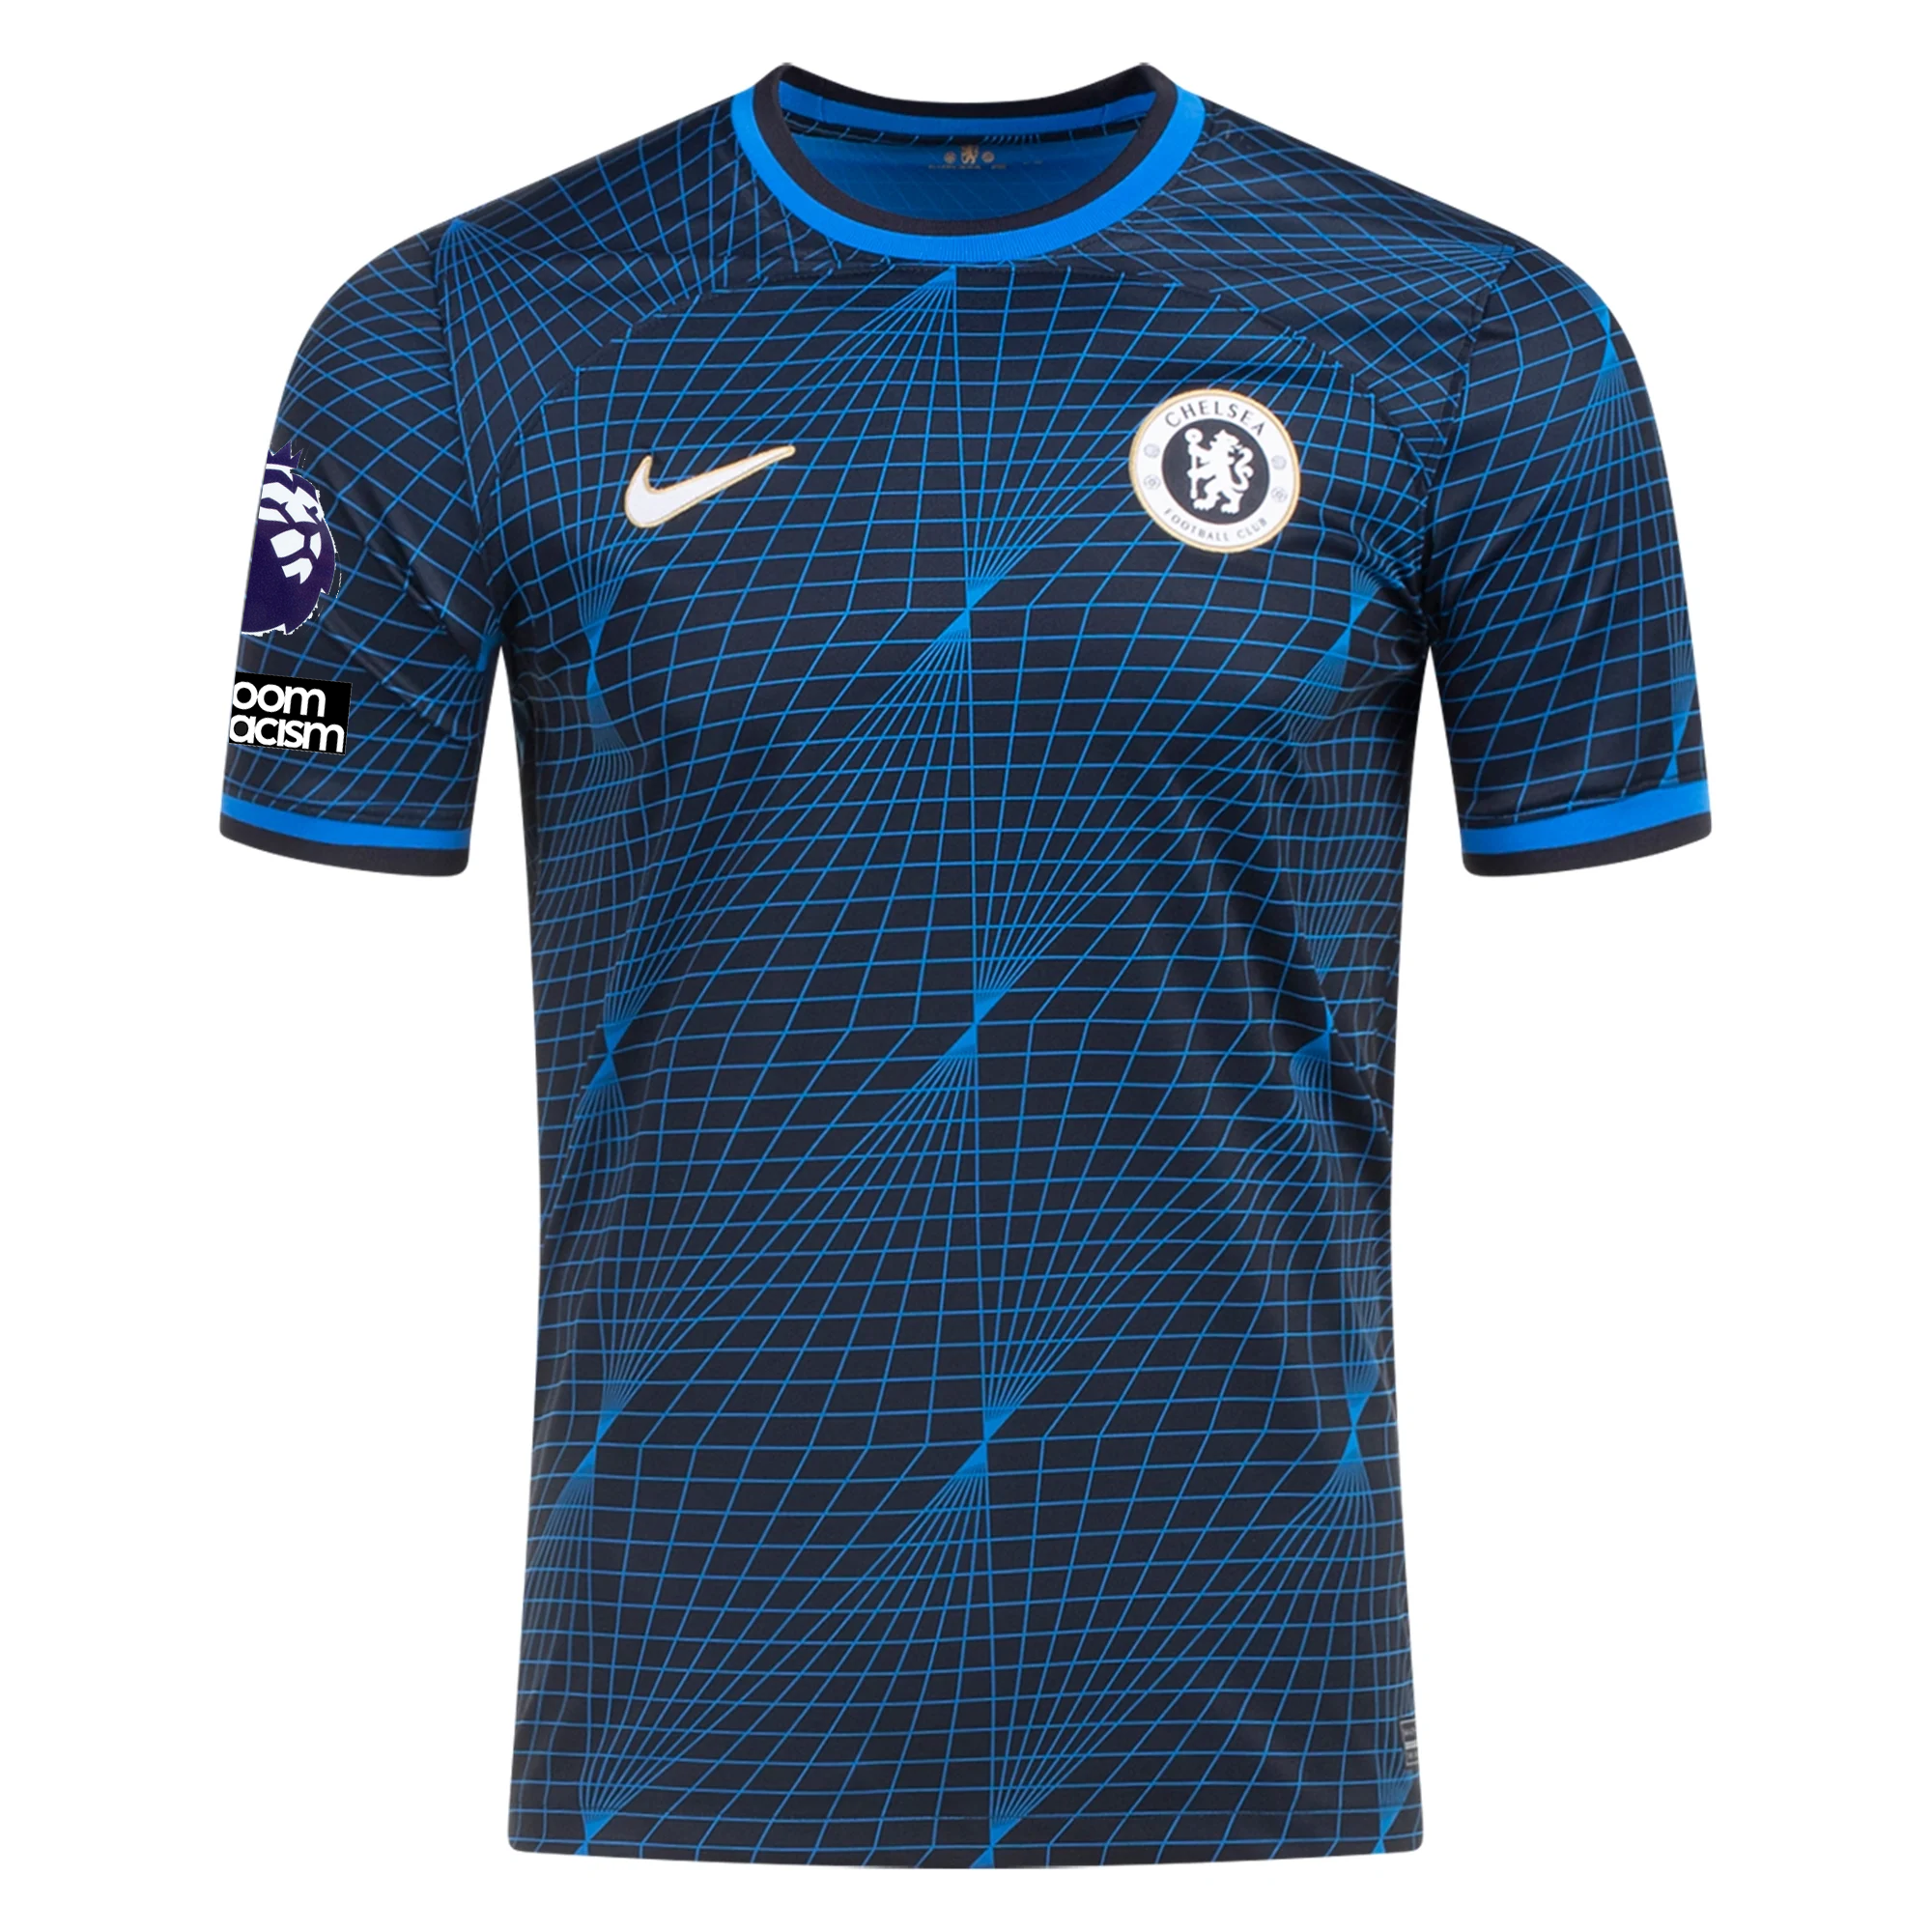 Nicolas Jackson Chelsea 23/24 Home Jersey by Nike - Size 3XL